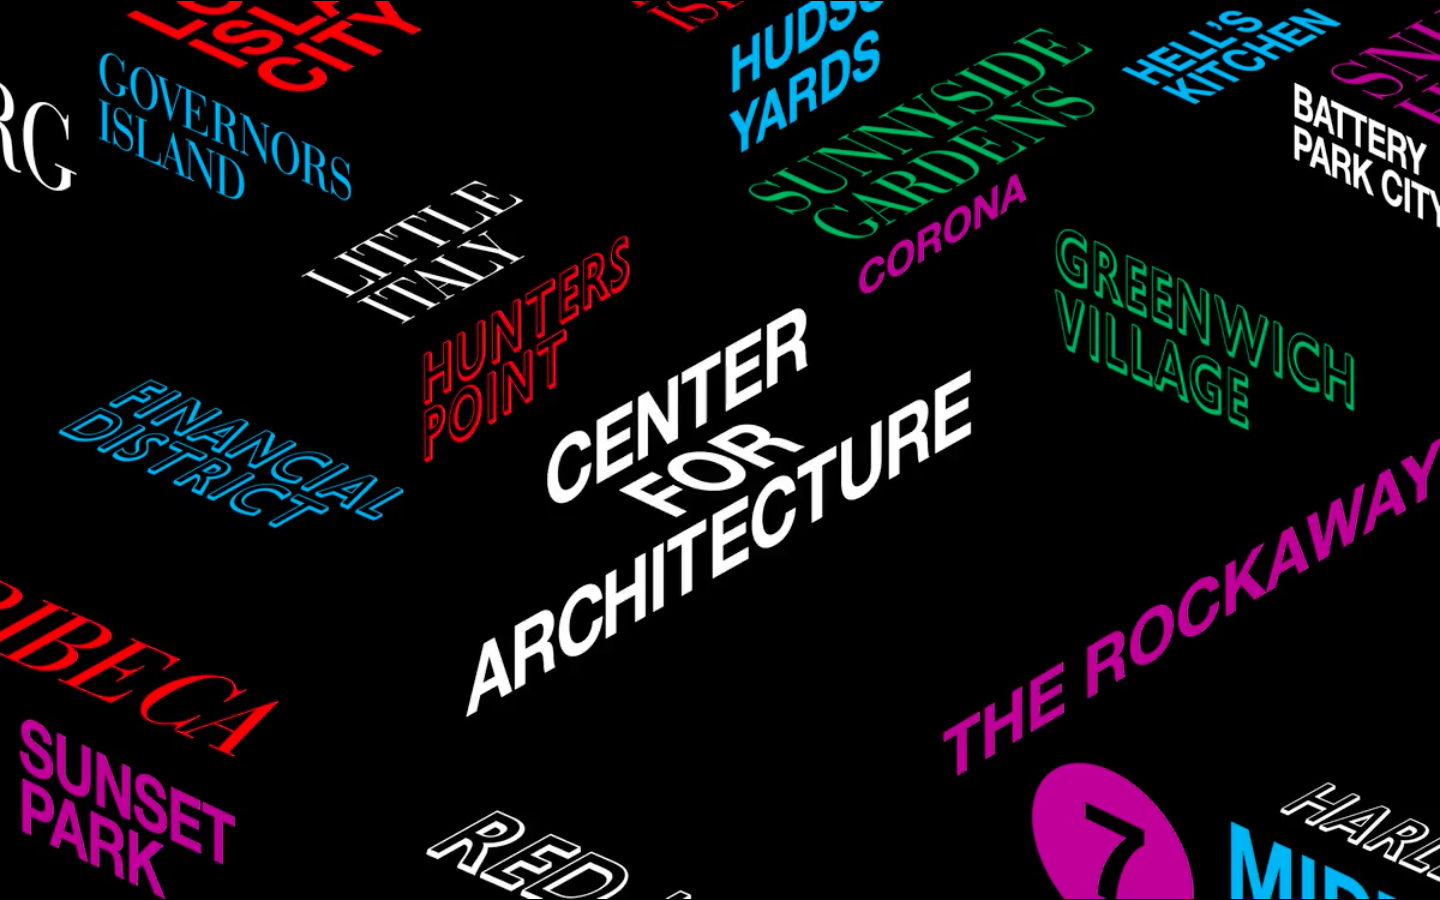 Graphic identity designed by Pentagram partner Natasha Jen and team for the AIA 2018 Conference on Architecture